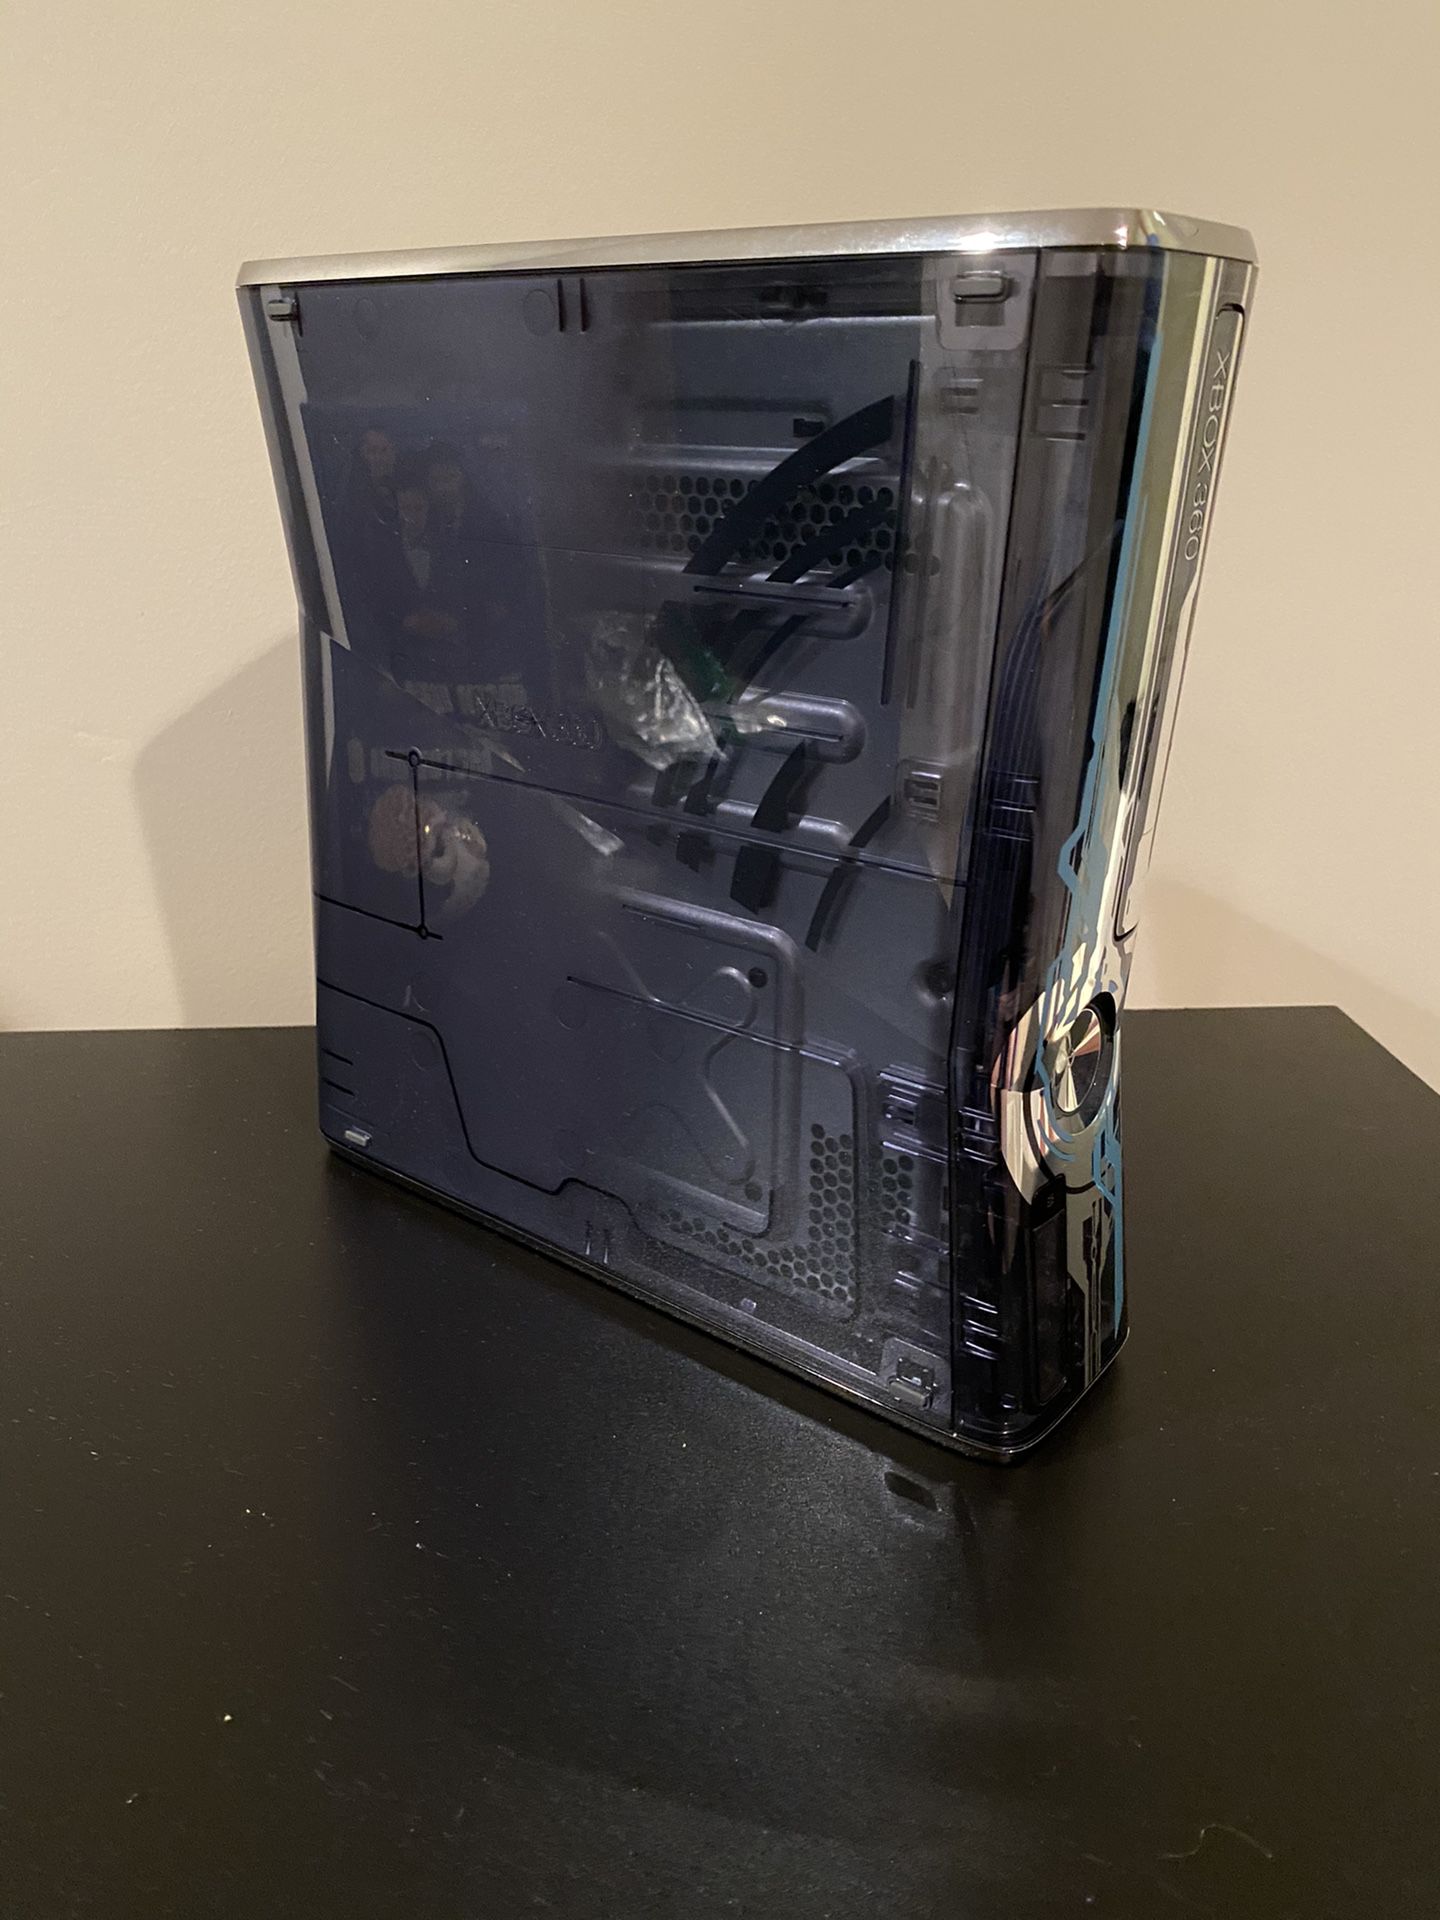 Limited Edition Halo Xbox 360 with controllers